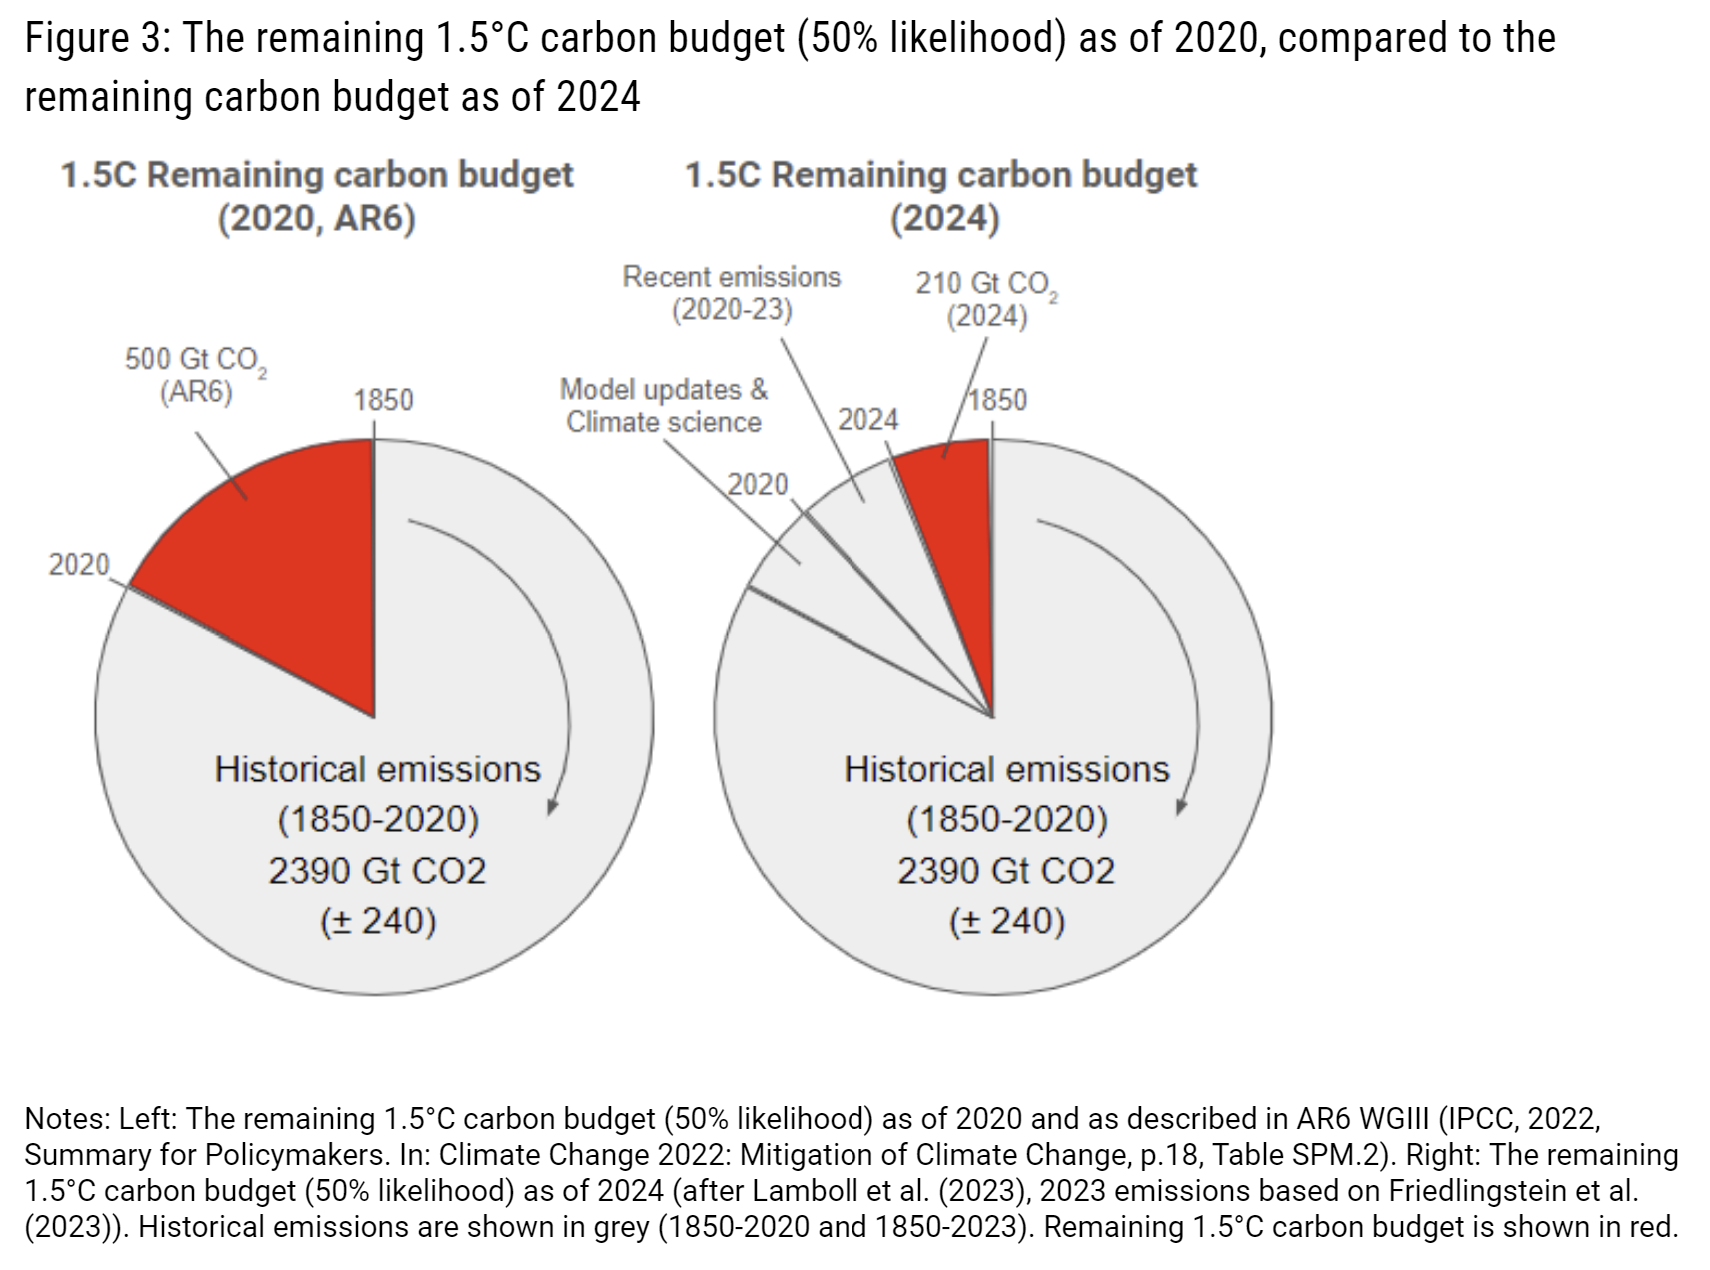 The remaining 1.5°C carbon budget (50% likelihood) as of 2020, compared to the remaining carbon budget as of 2024